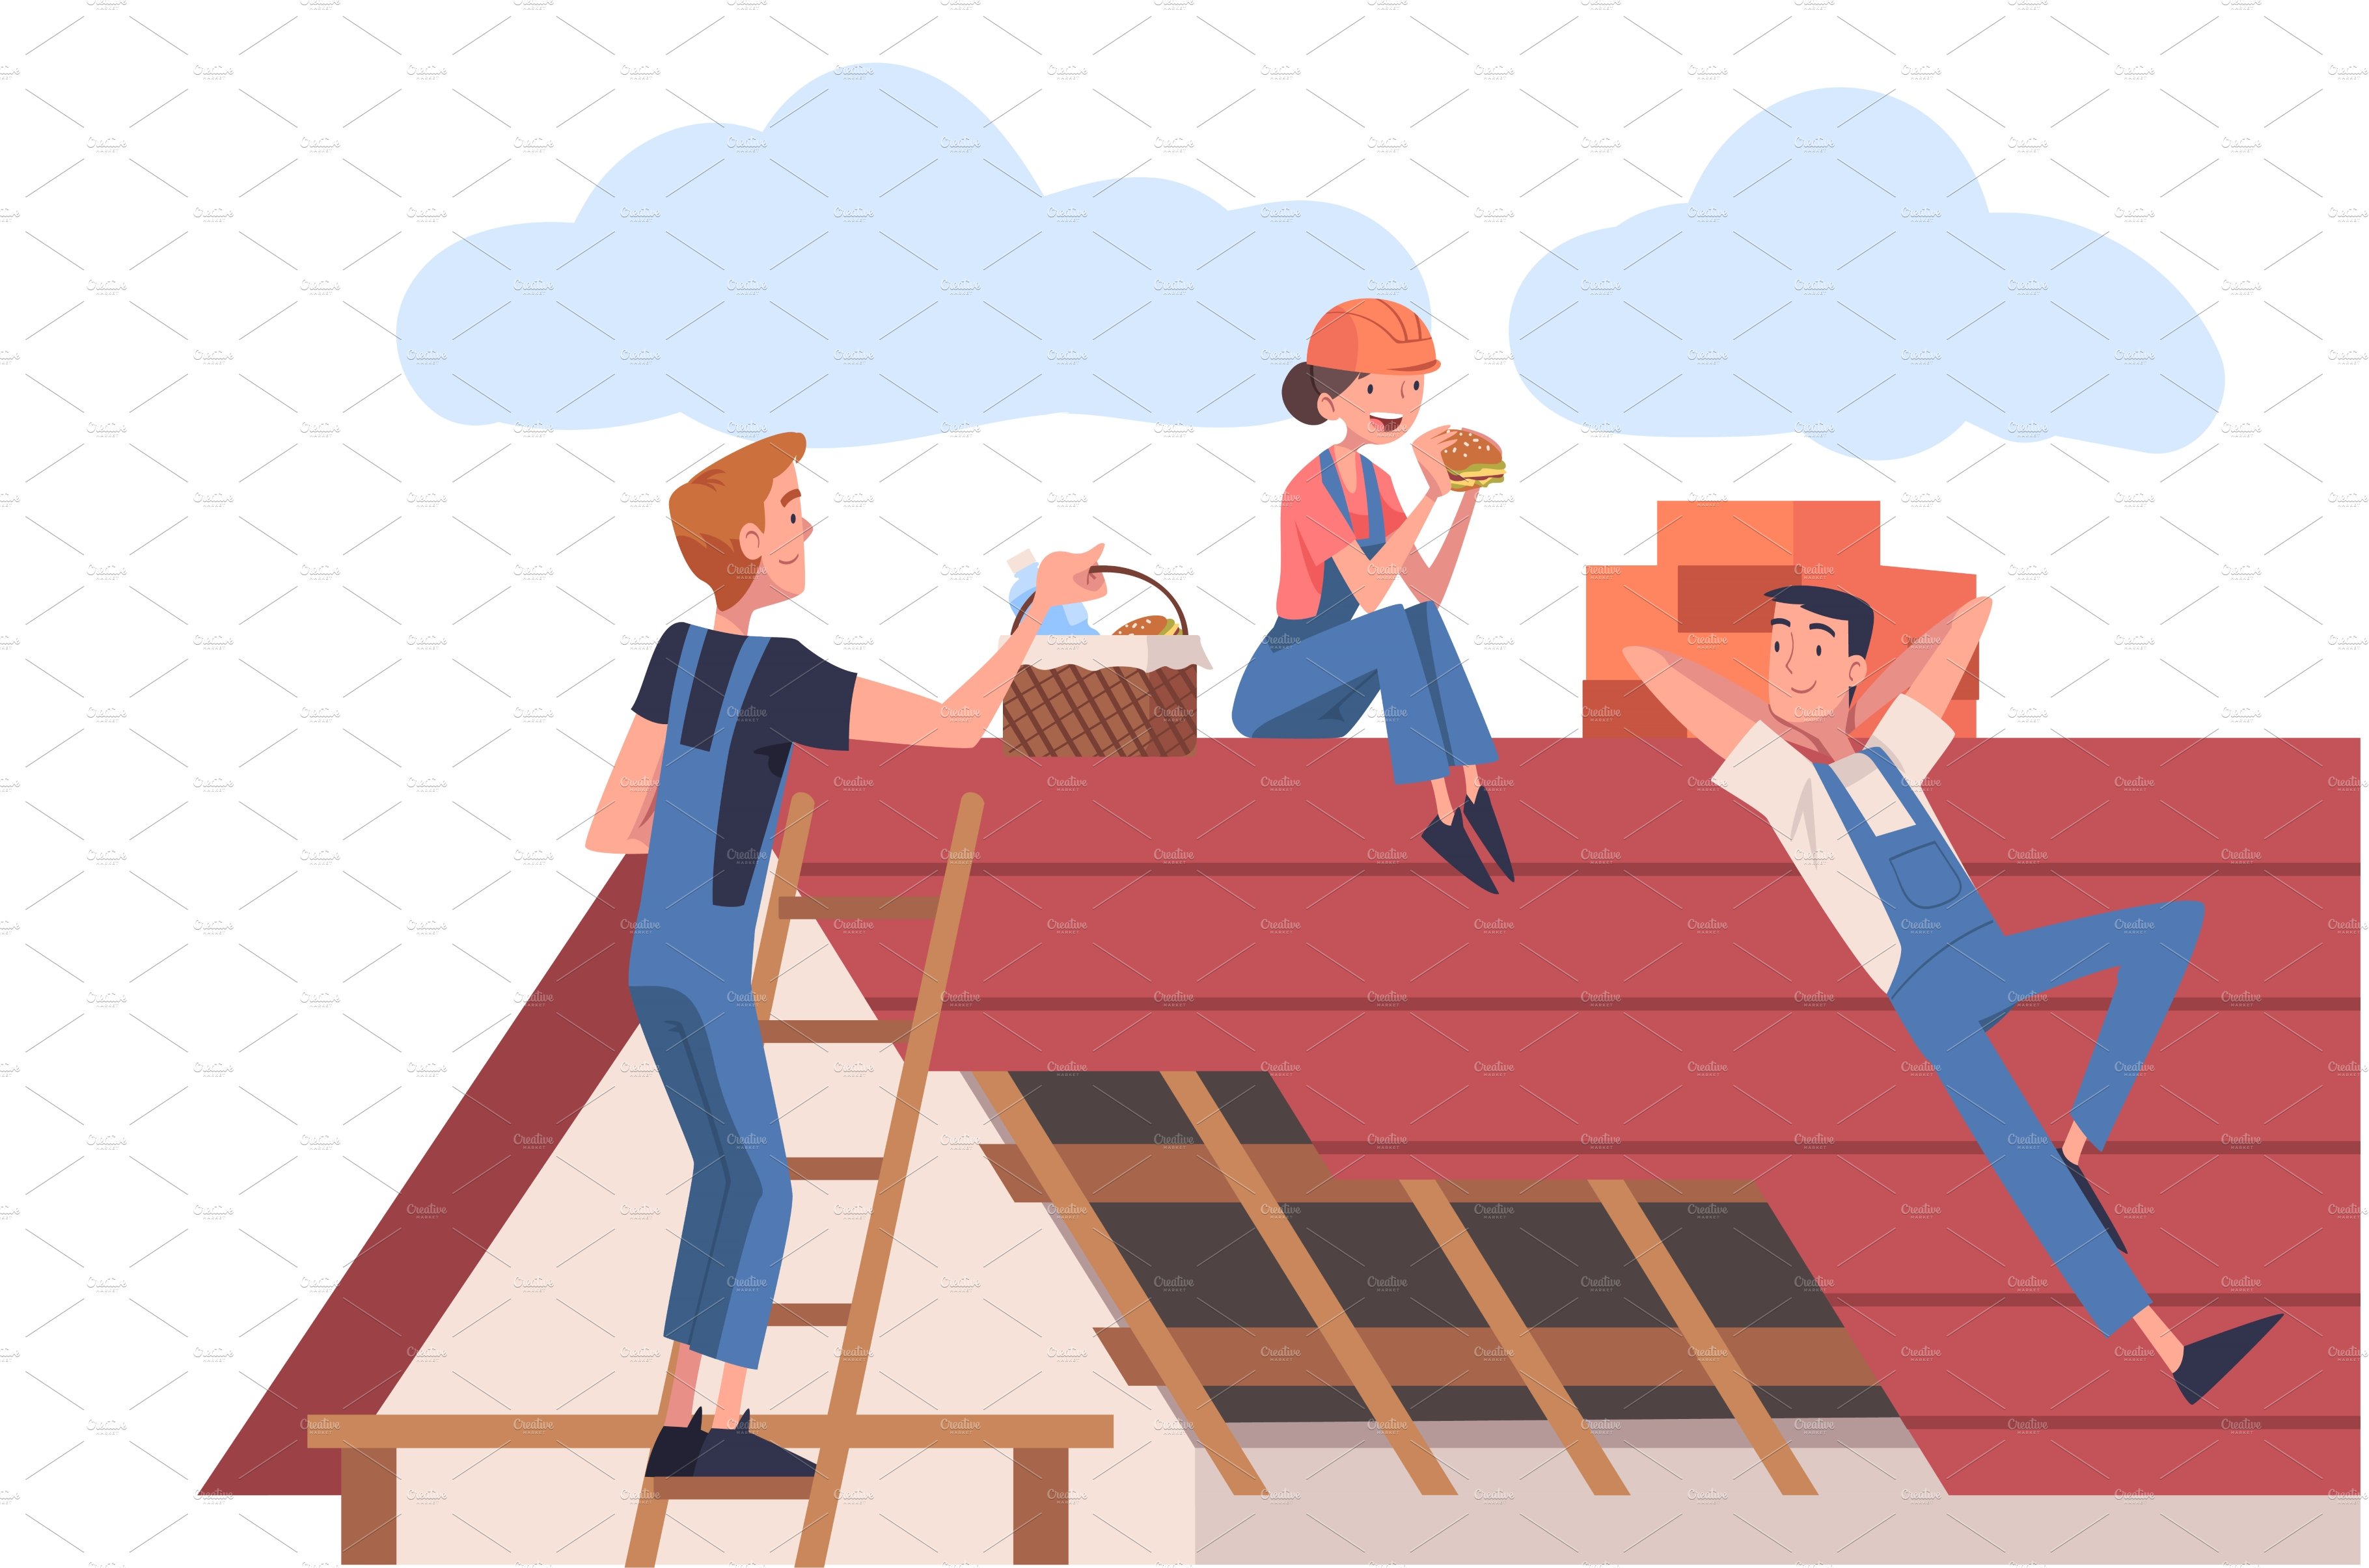 Roof Repair with People cover image.